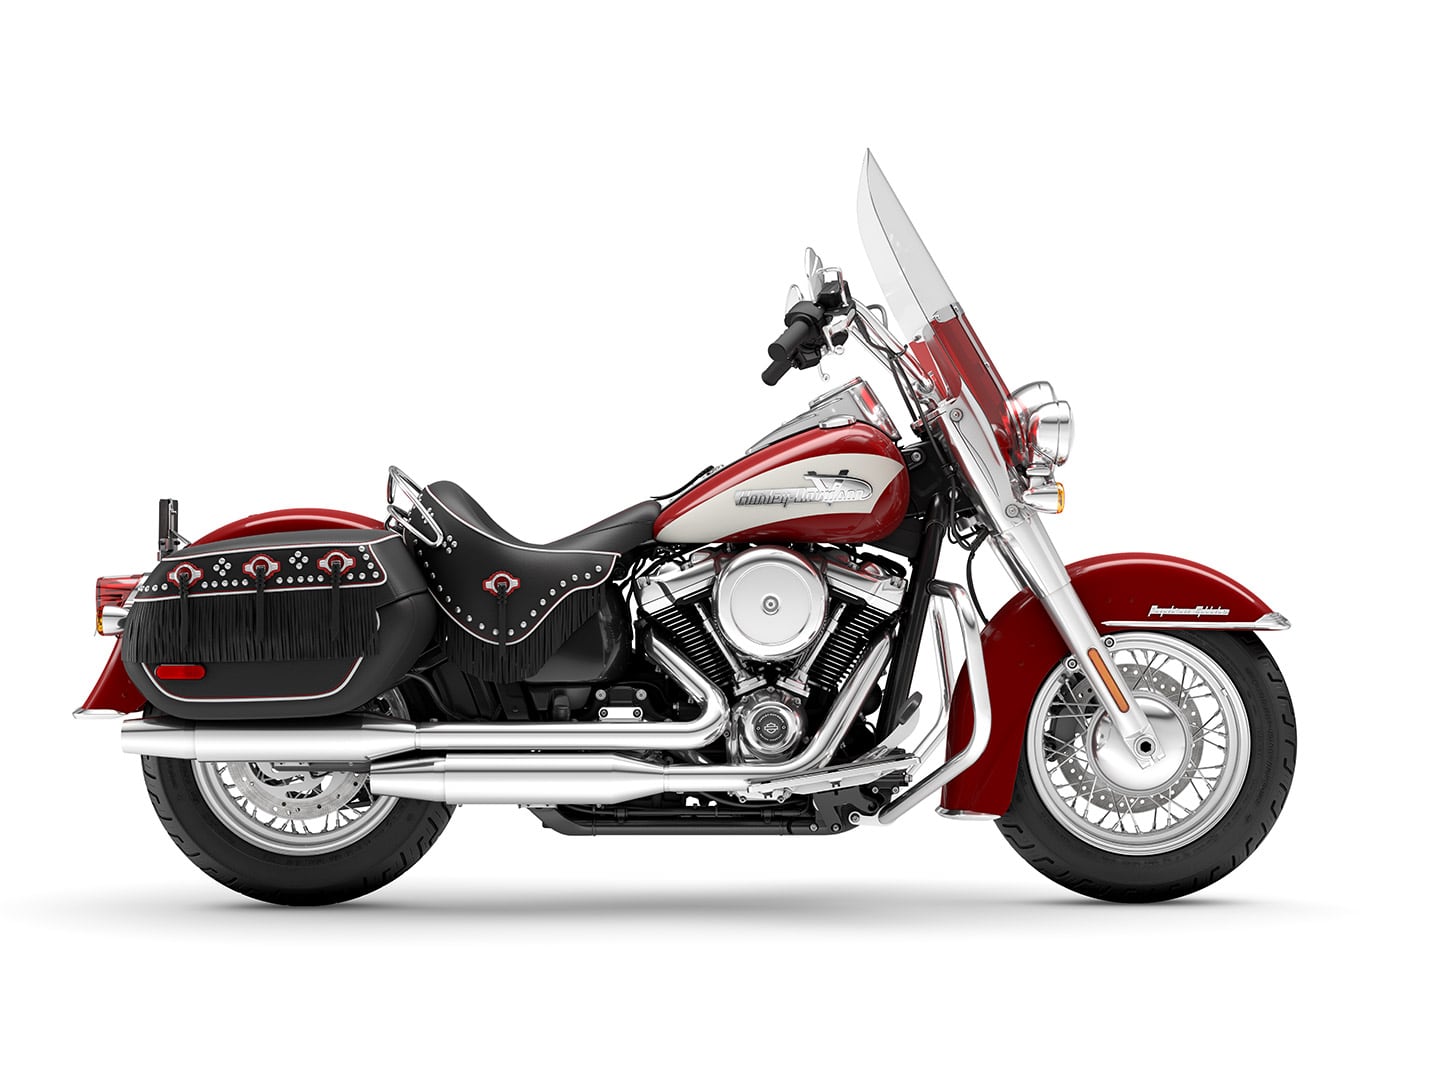 Based on the Harley’s Heritage Classic 114, the Hydra-Glide Revival is an ode to the 1956 FLH.